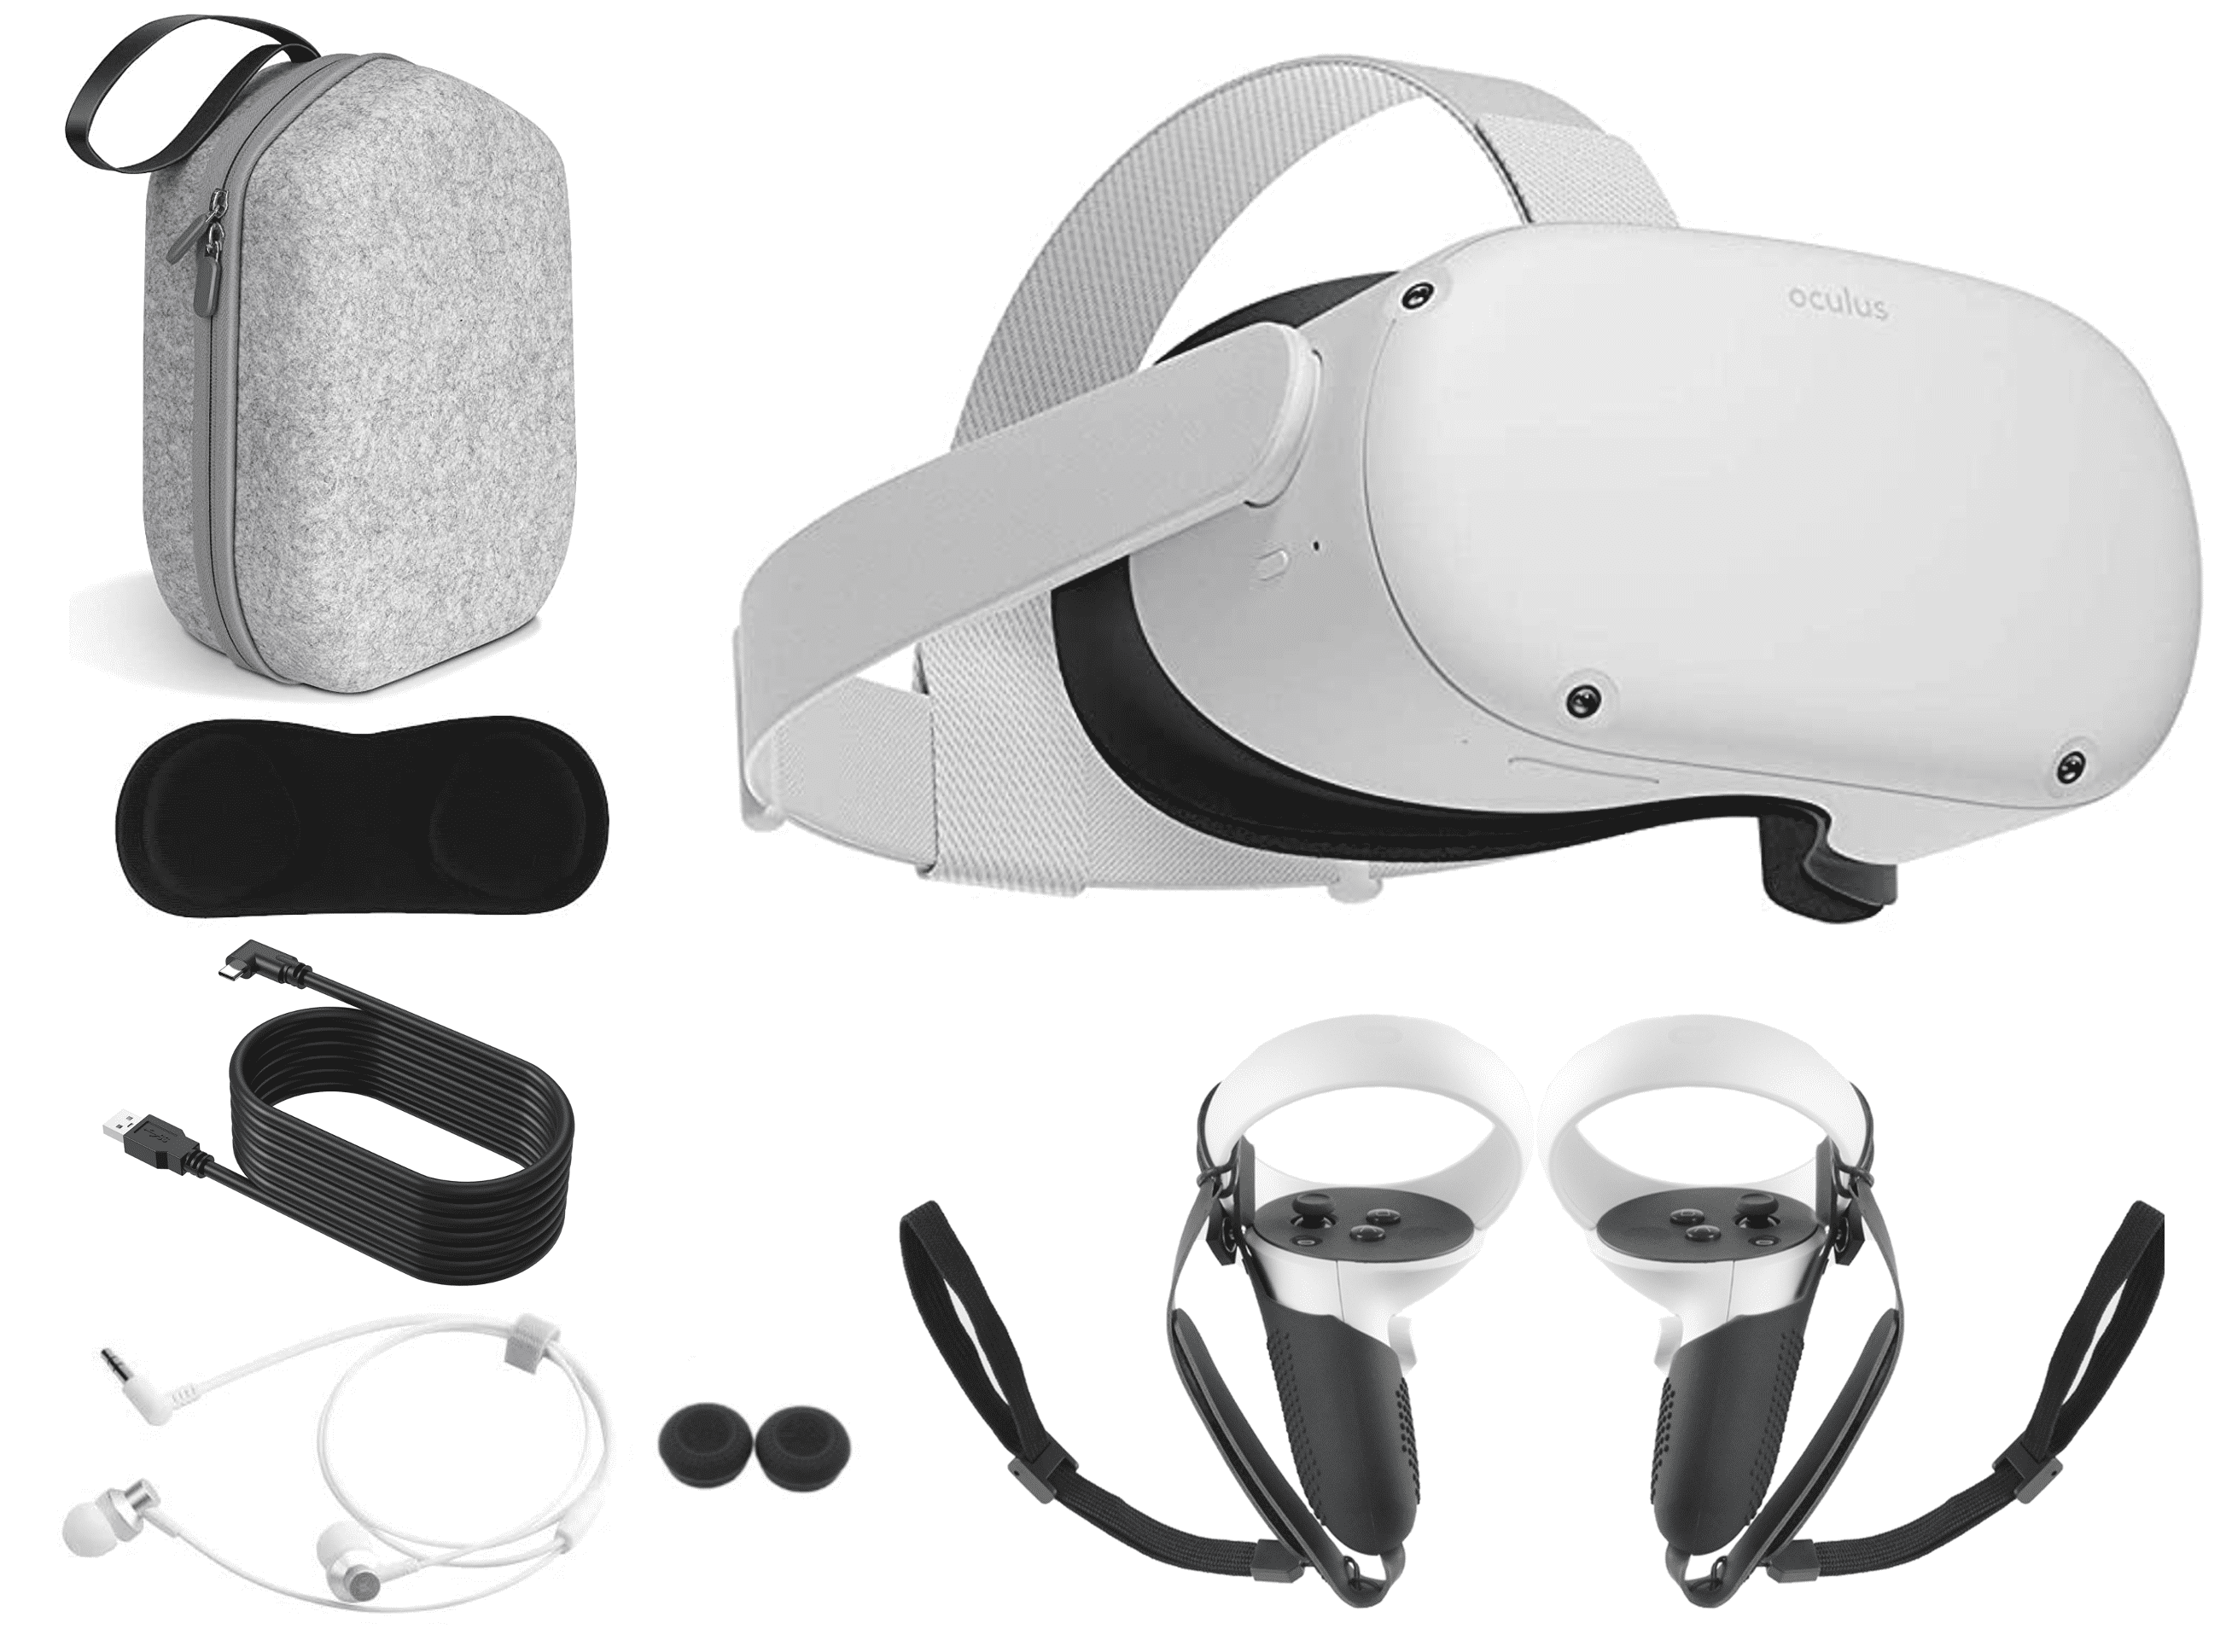 Standalone VR: What You Need to Know About All-in-One Headsets